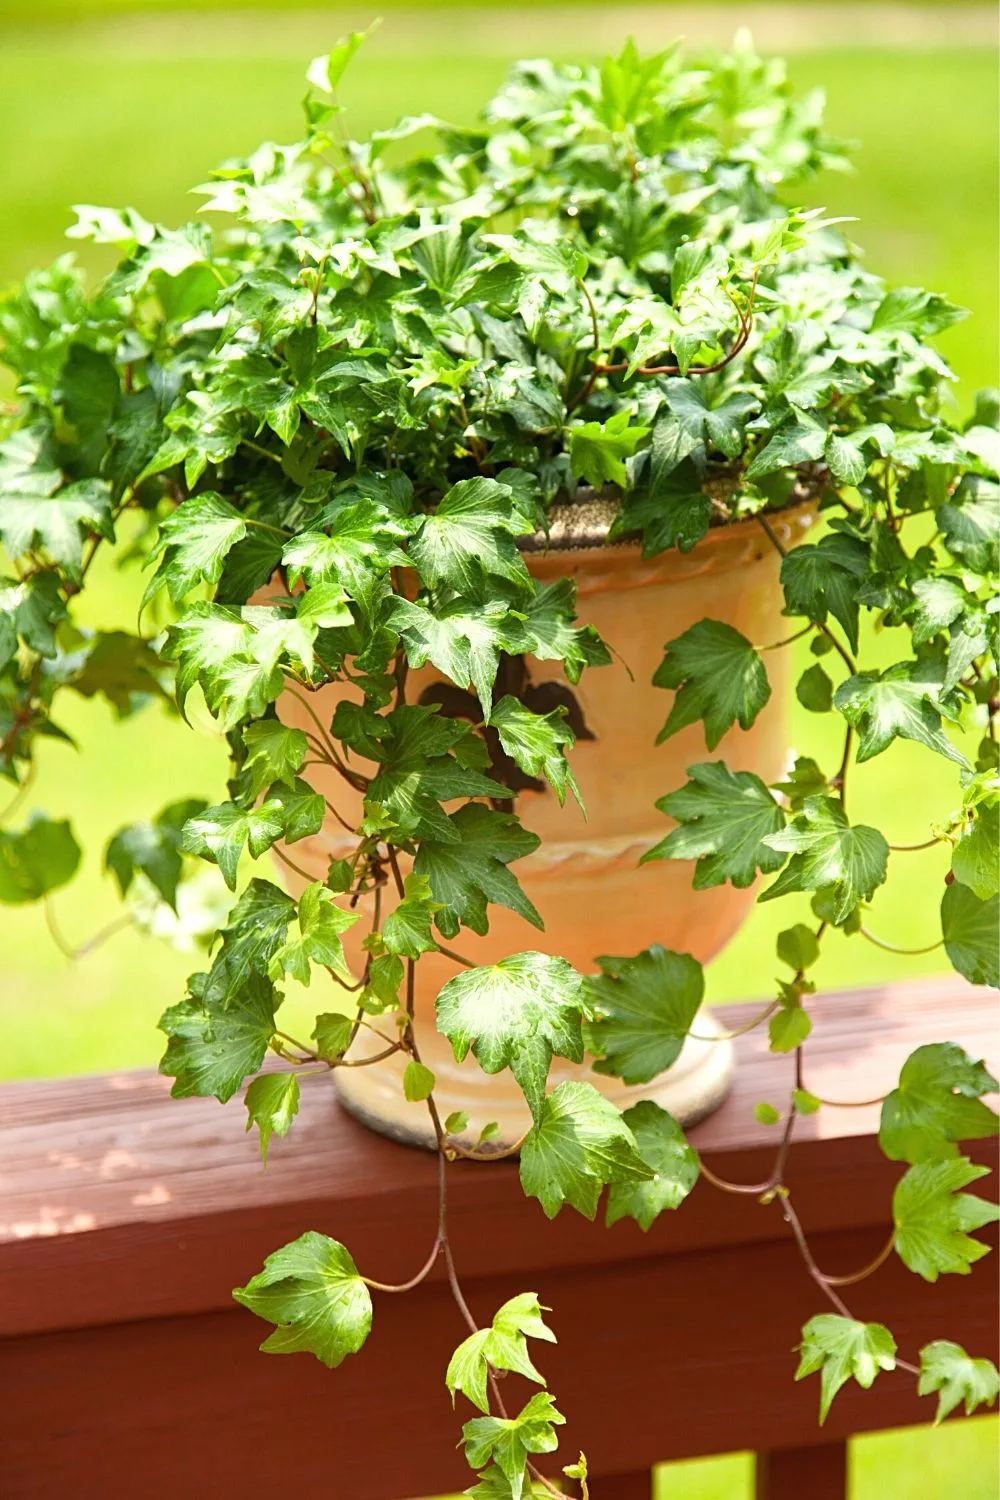 English ivy, known to be an outdoor plant, can be grown on a west-facing balcony close to walls and balconies